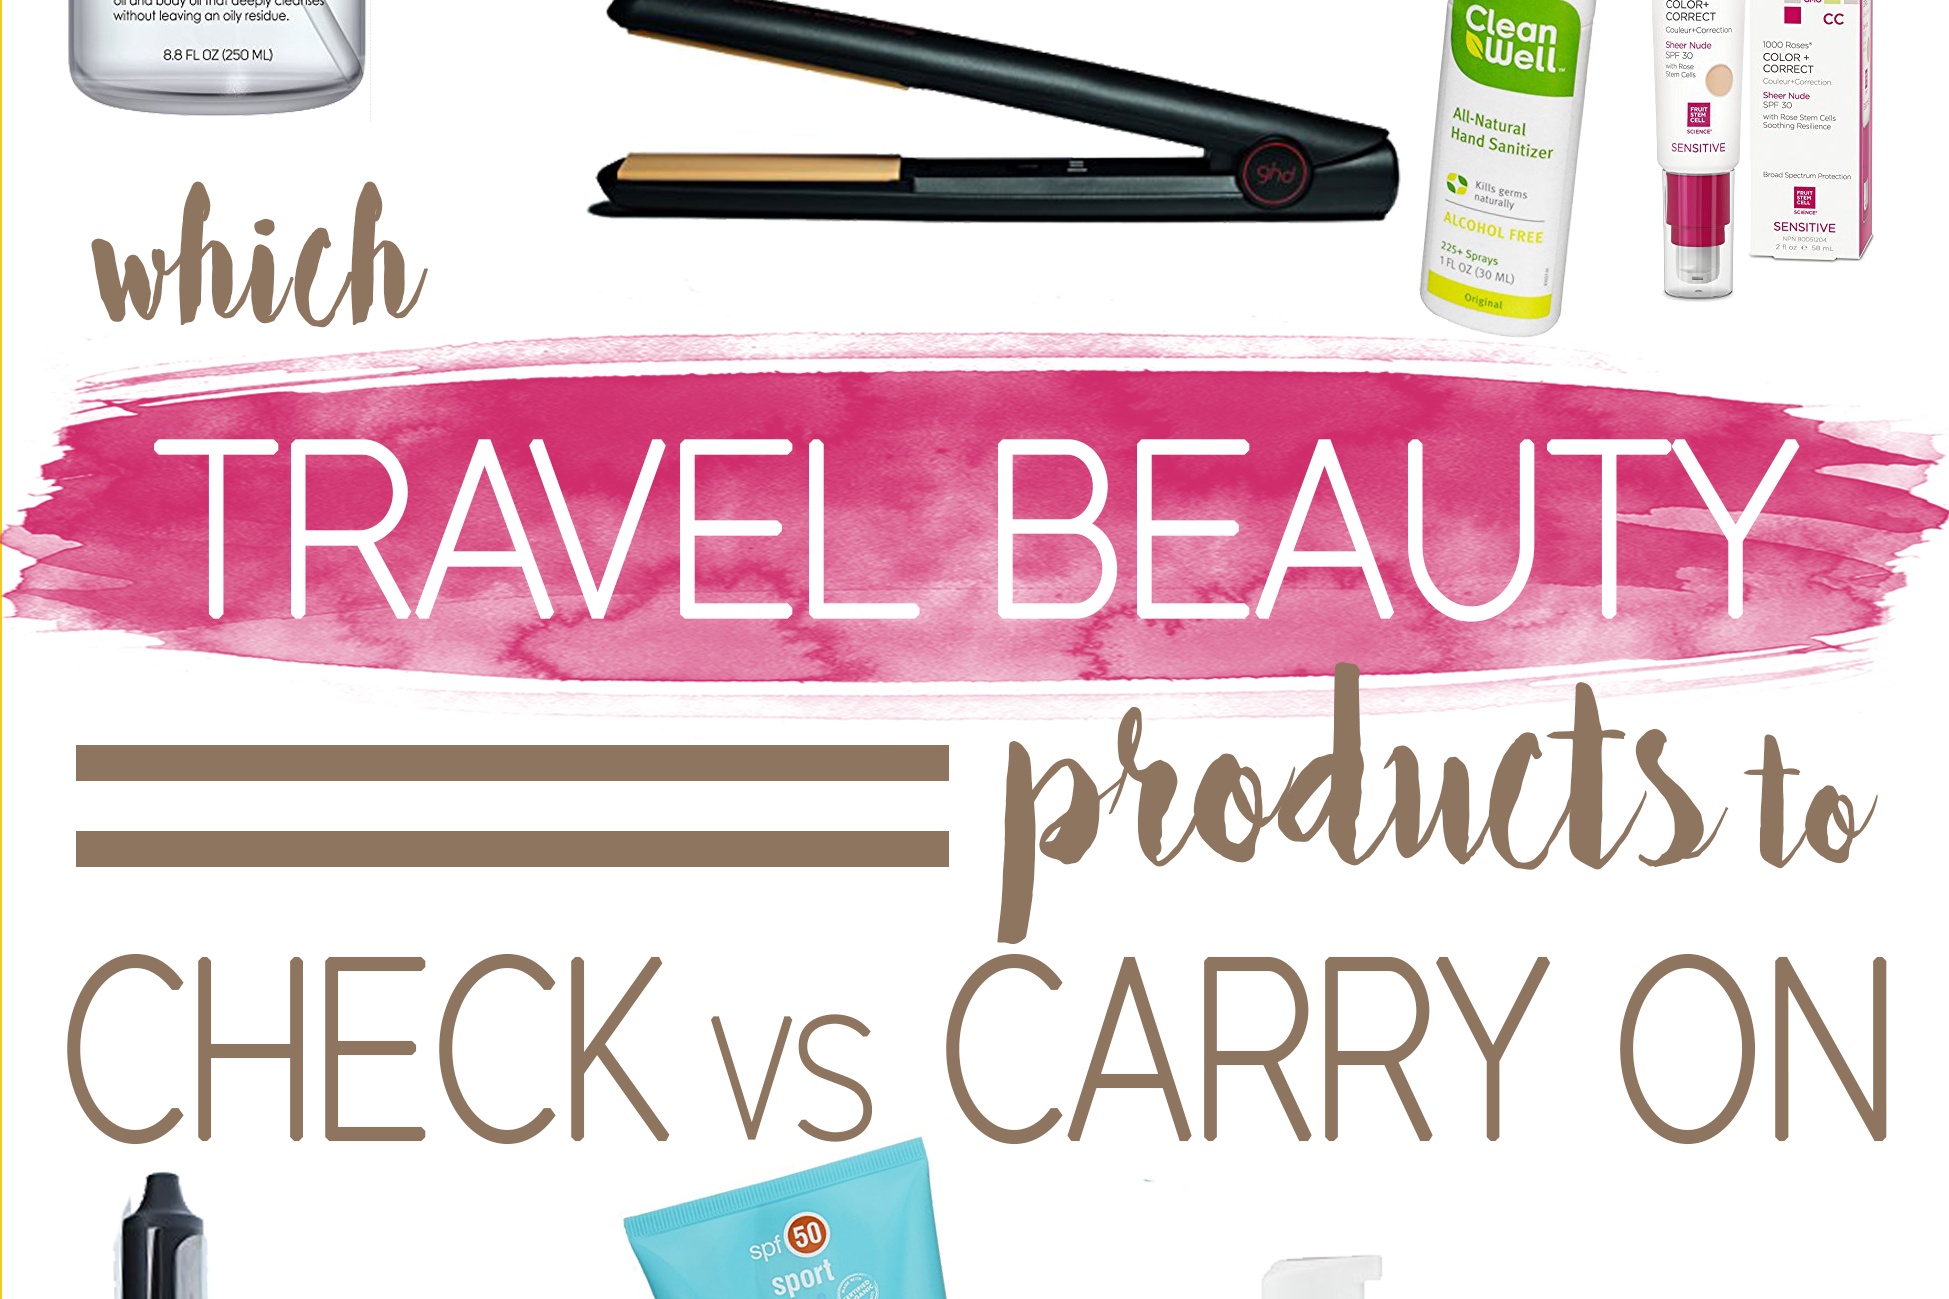 Travel Beauty Products to Check vs Carry On